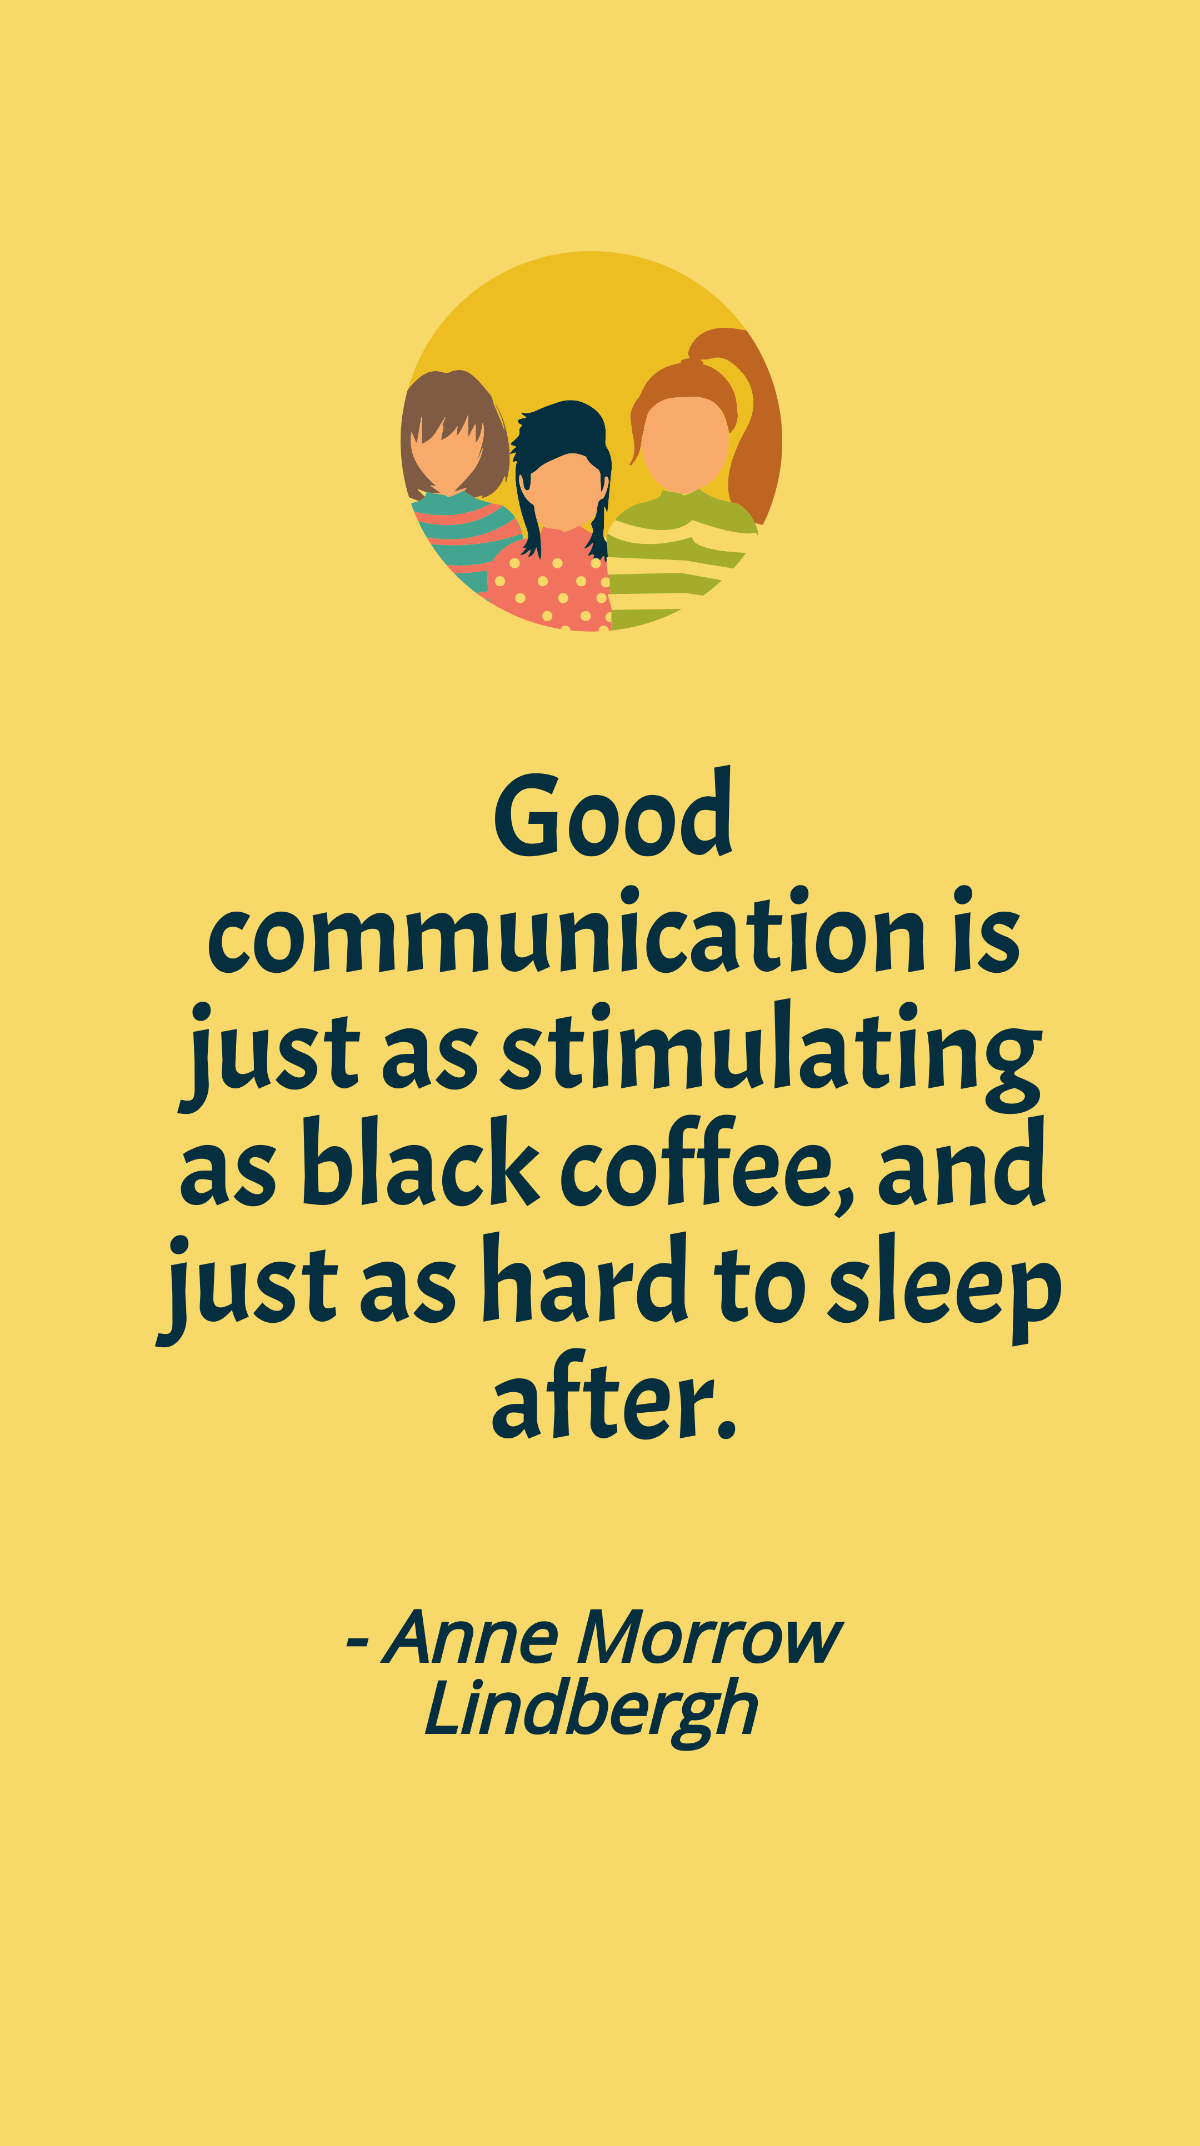 Free Anne Morrow Lindbergh - Good communication is just as stimulating as black coffee, and just as hard to sleep after. Template